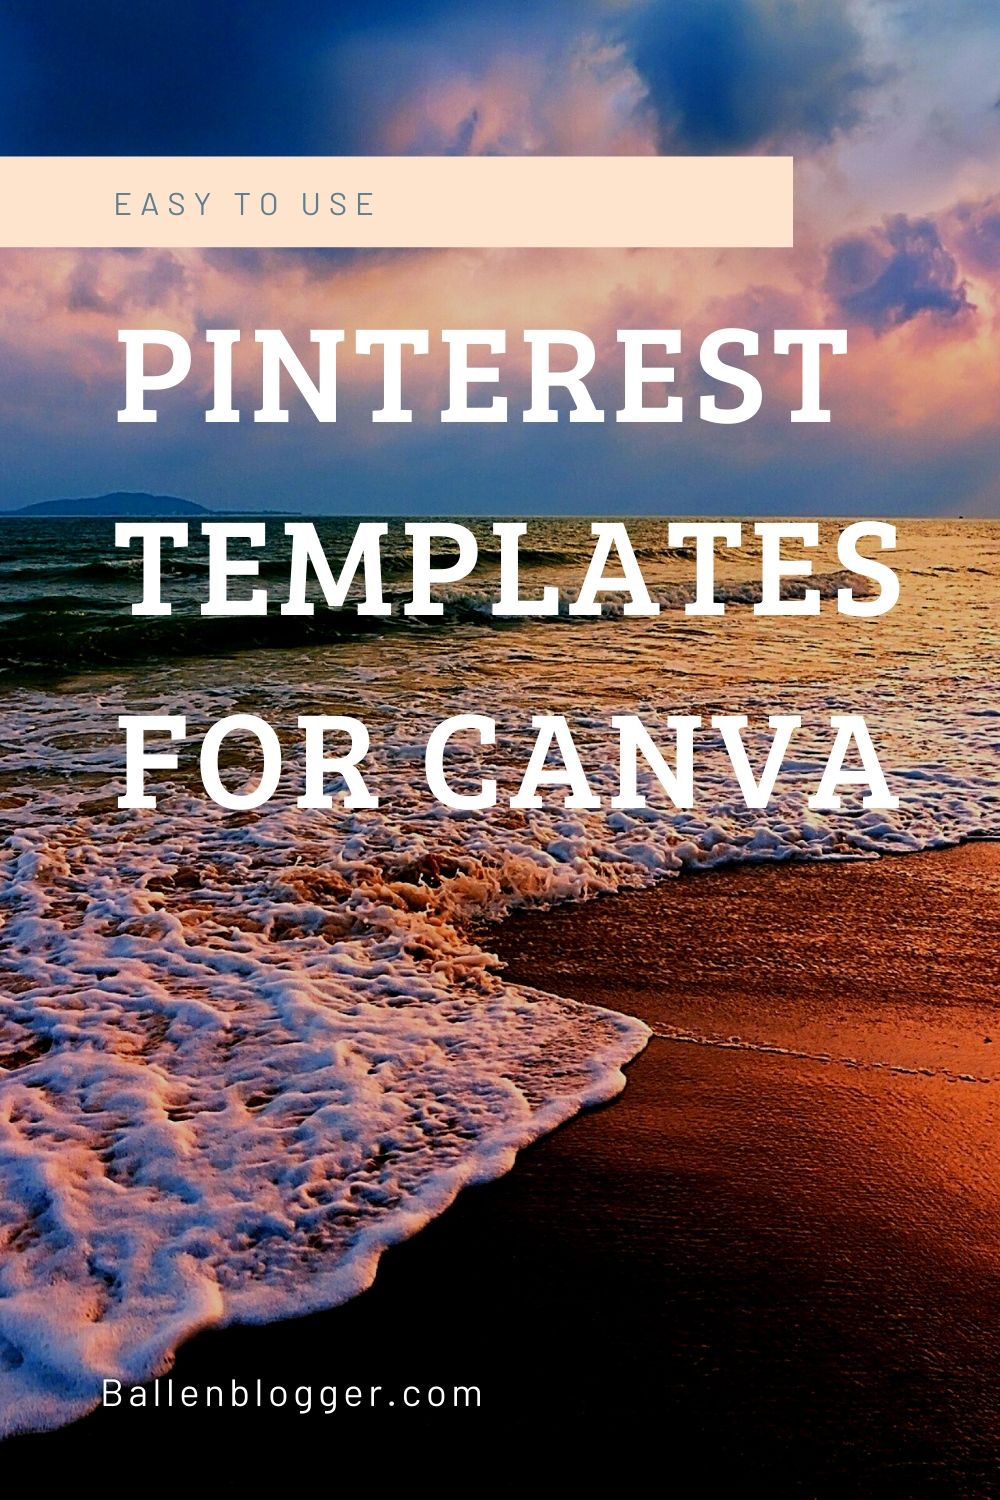 You don't need to be a designer nor does it have to take much time to create fresh designs. Check out Creative Market and Ladyboss Studio for amazing pinterest templates that work with canva. 